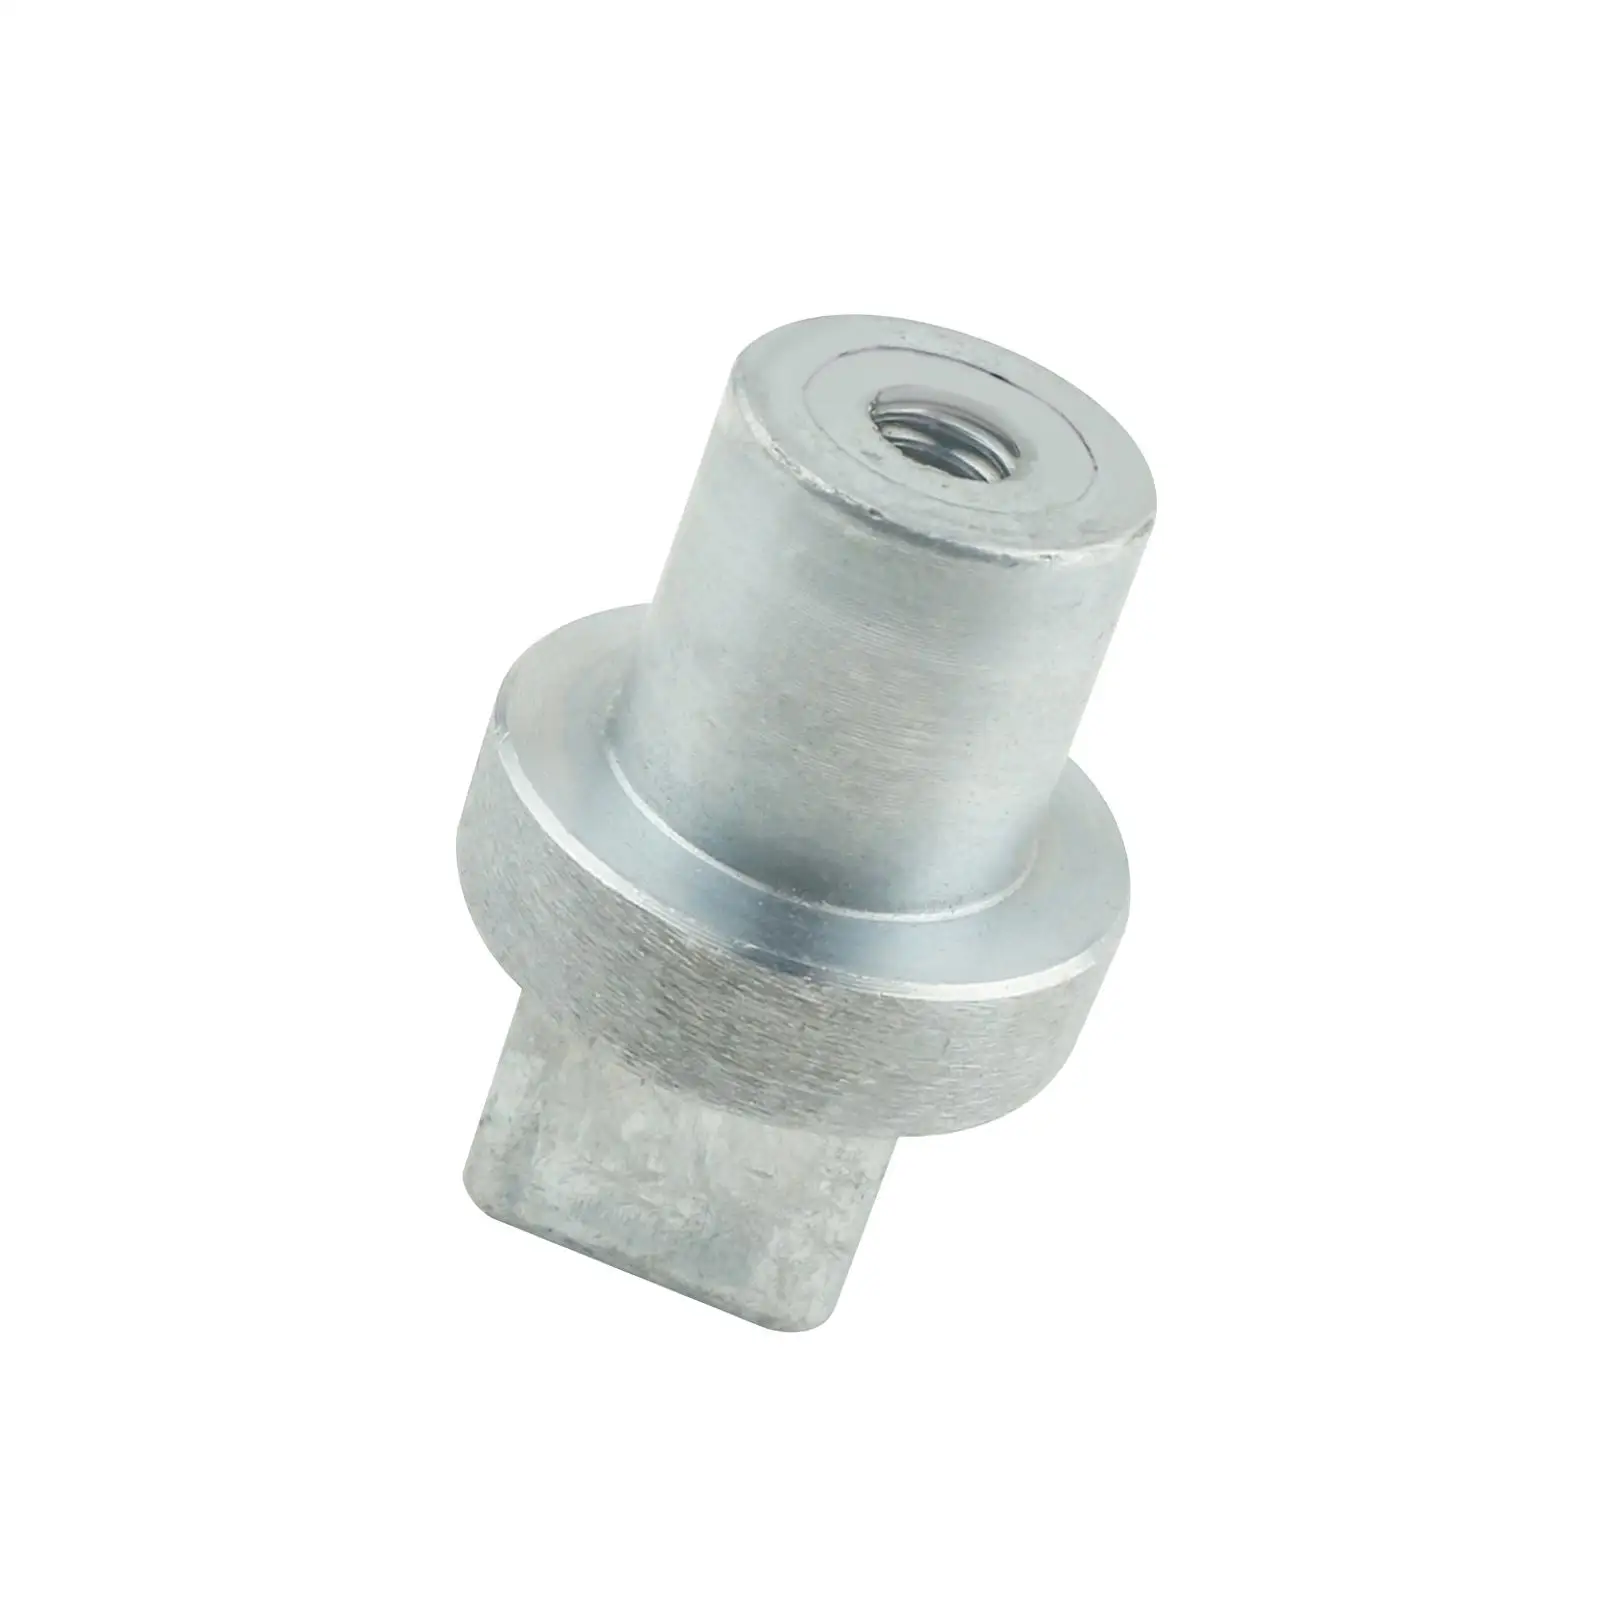 Zinc Anode 67F-45251 Metal Direct Replaces Premium Marine Engine Zinc Cylinder Anode for Yamaha 4 Stroke 80HP 100HP 200 HP